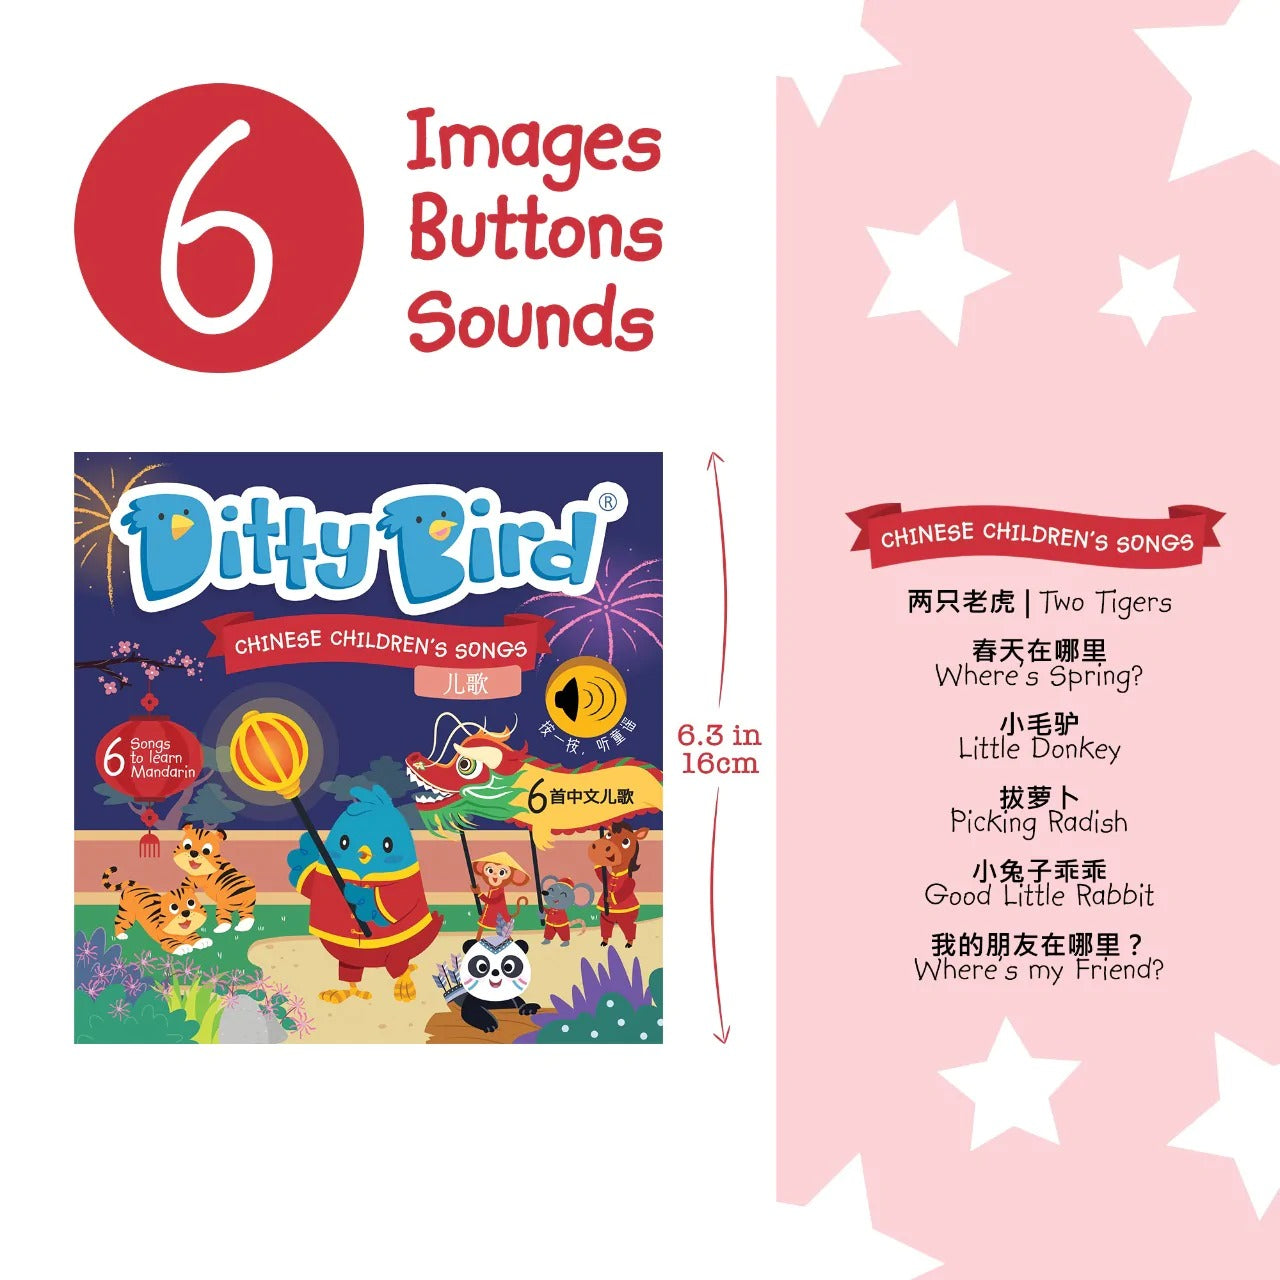 Sounds Book - Chinese Children's Songs in Mandarin